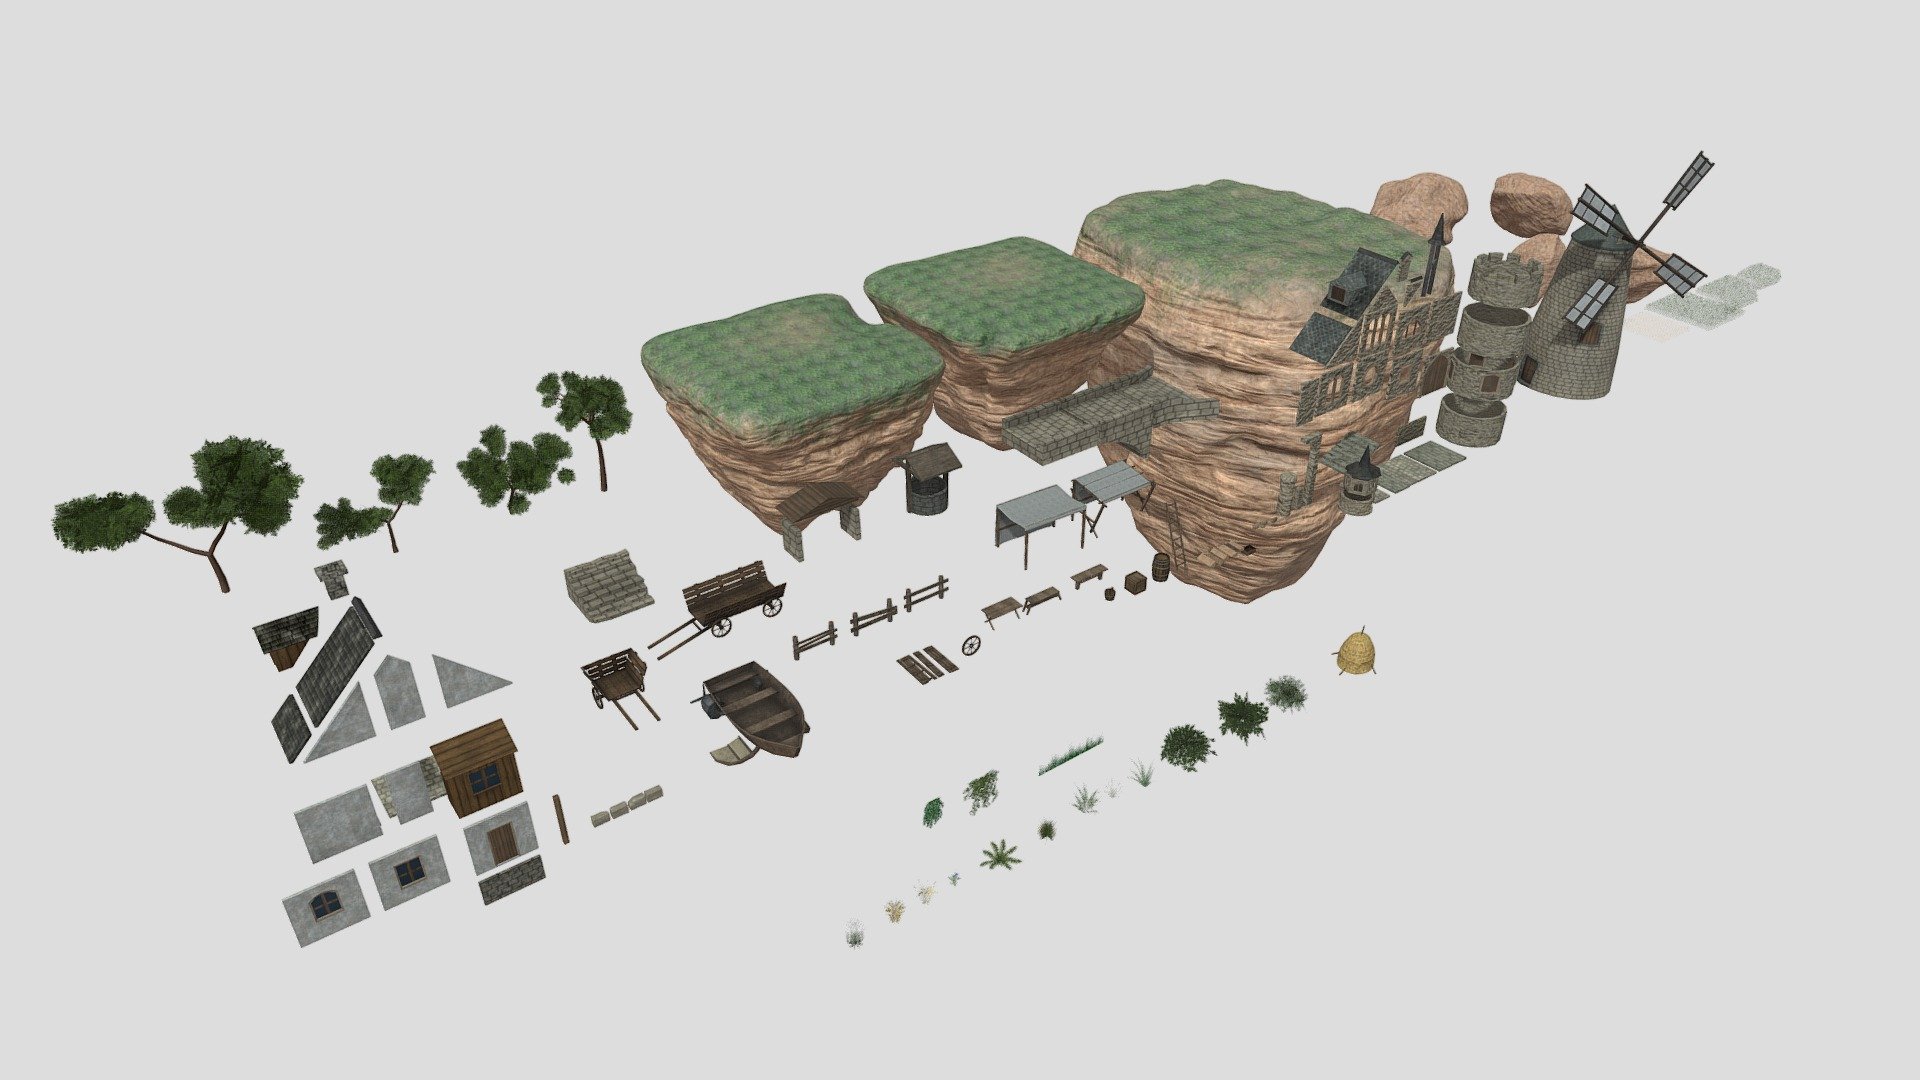 Fantasy medieval assets collection and modular buildings components.
Also in the package there are plants and trees.
This pack contains: bridge components, boat, wagon, windmill, tent, boxes, logs and more awesome models.
The scene that was made with this pack: https://sketchfab.com/3d-models/castle-in-the-sky-00b3e524d17e4f77910b307c36cc942d
 - Castle modular assets pack - 3D model by Mentalist (@Mentailst) 3d model